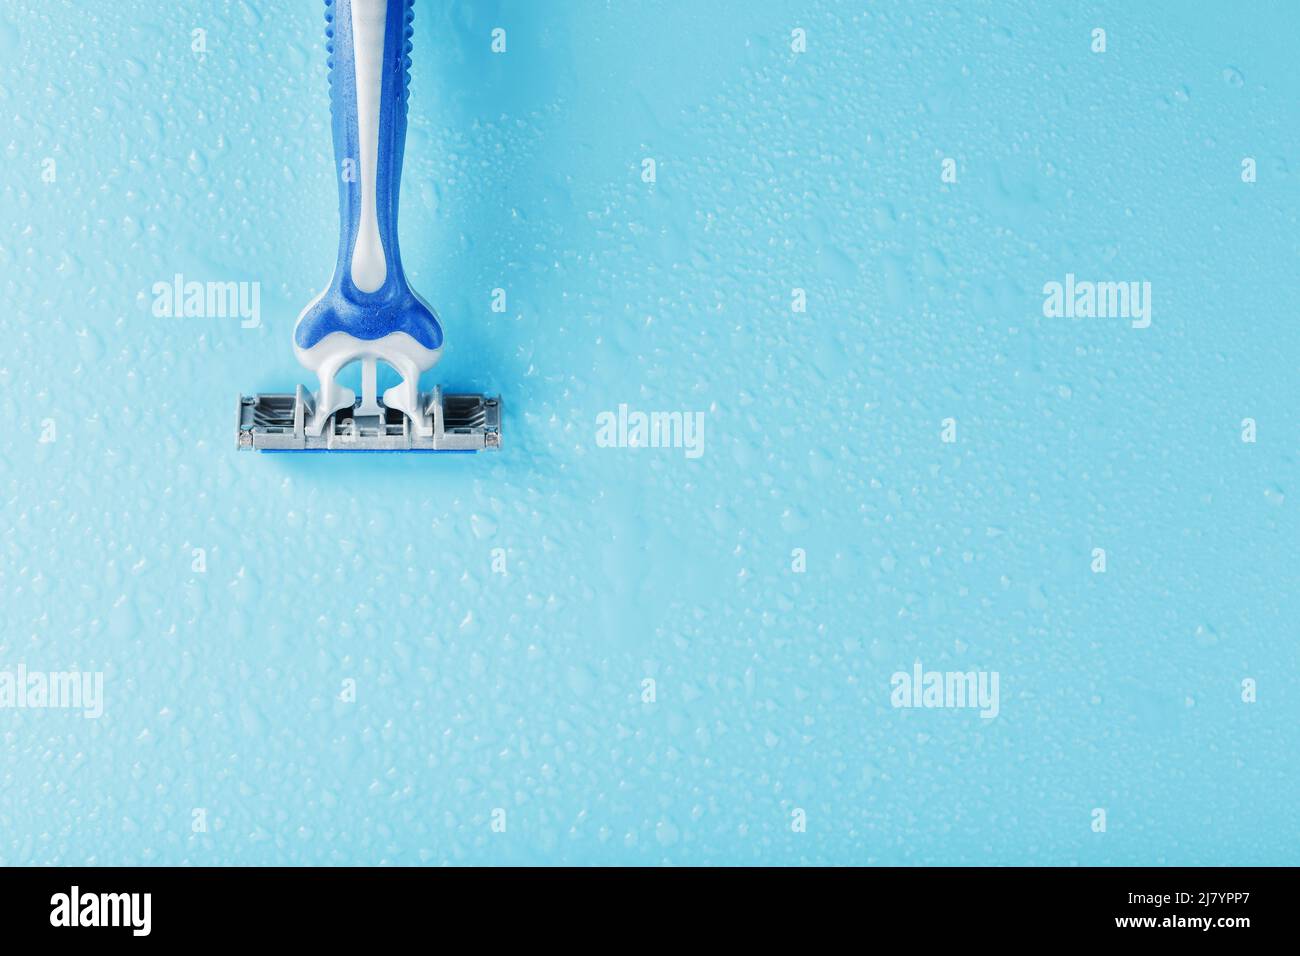 Razor blades on a blue background with drops of icy water close-up free space. The concept of purity and freshness Stock Photo